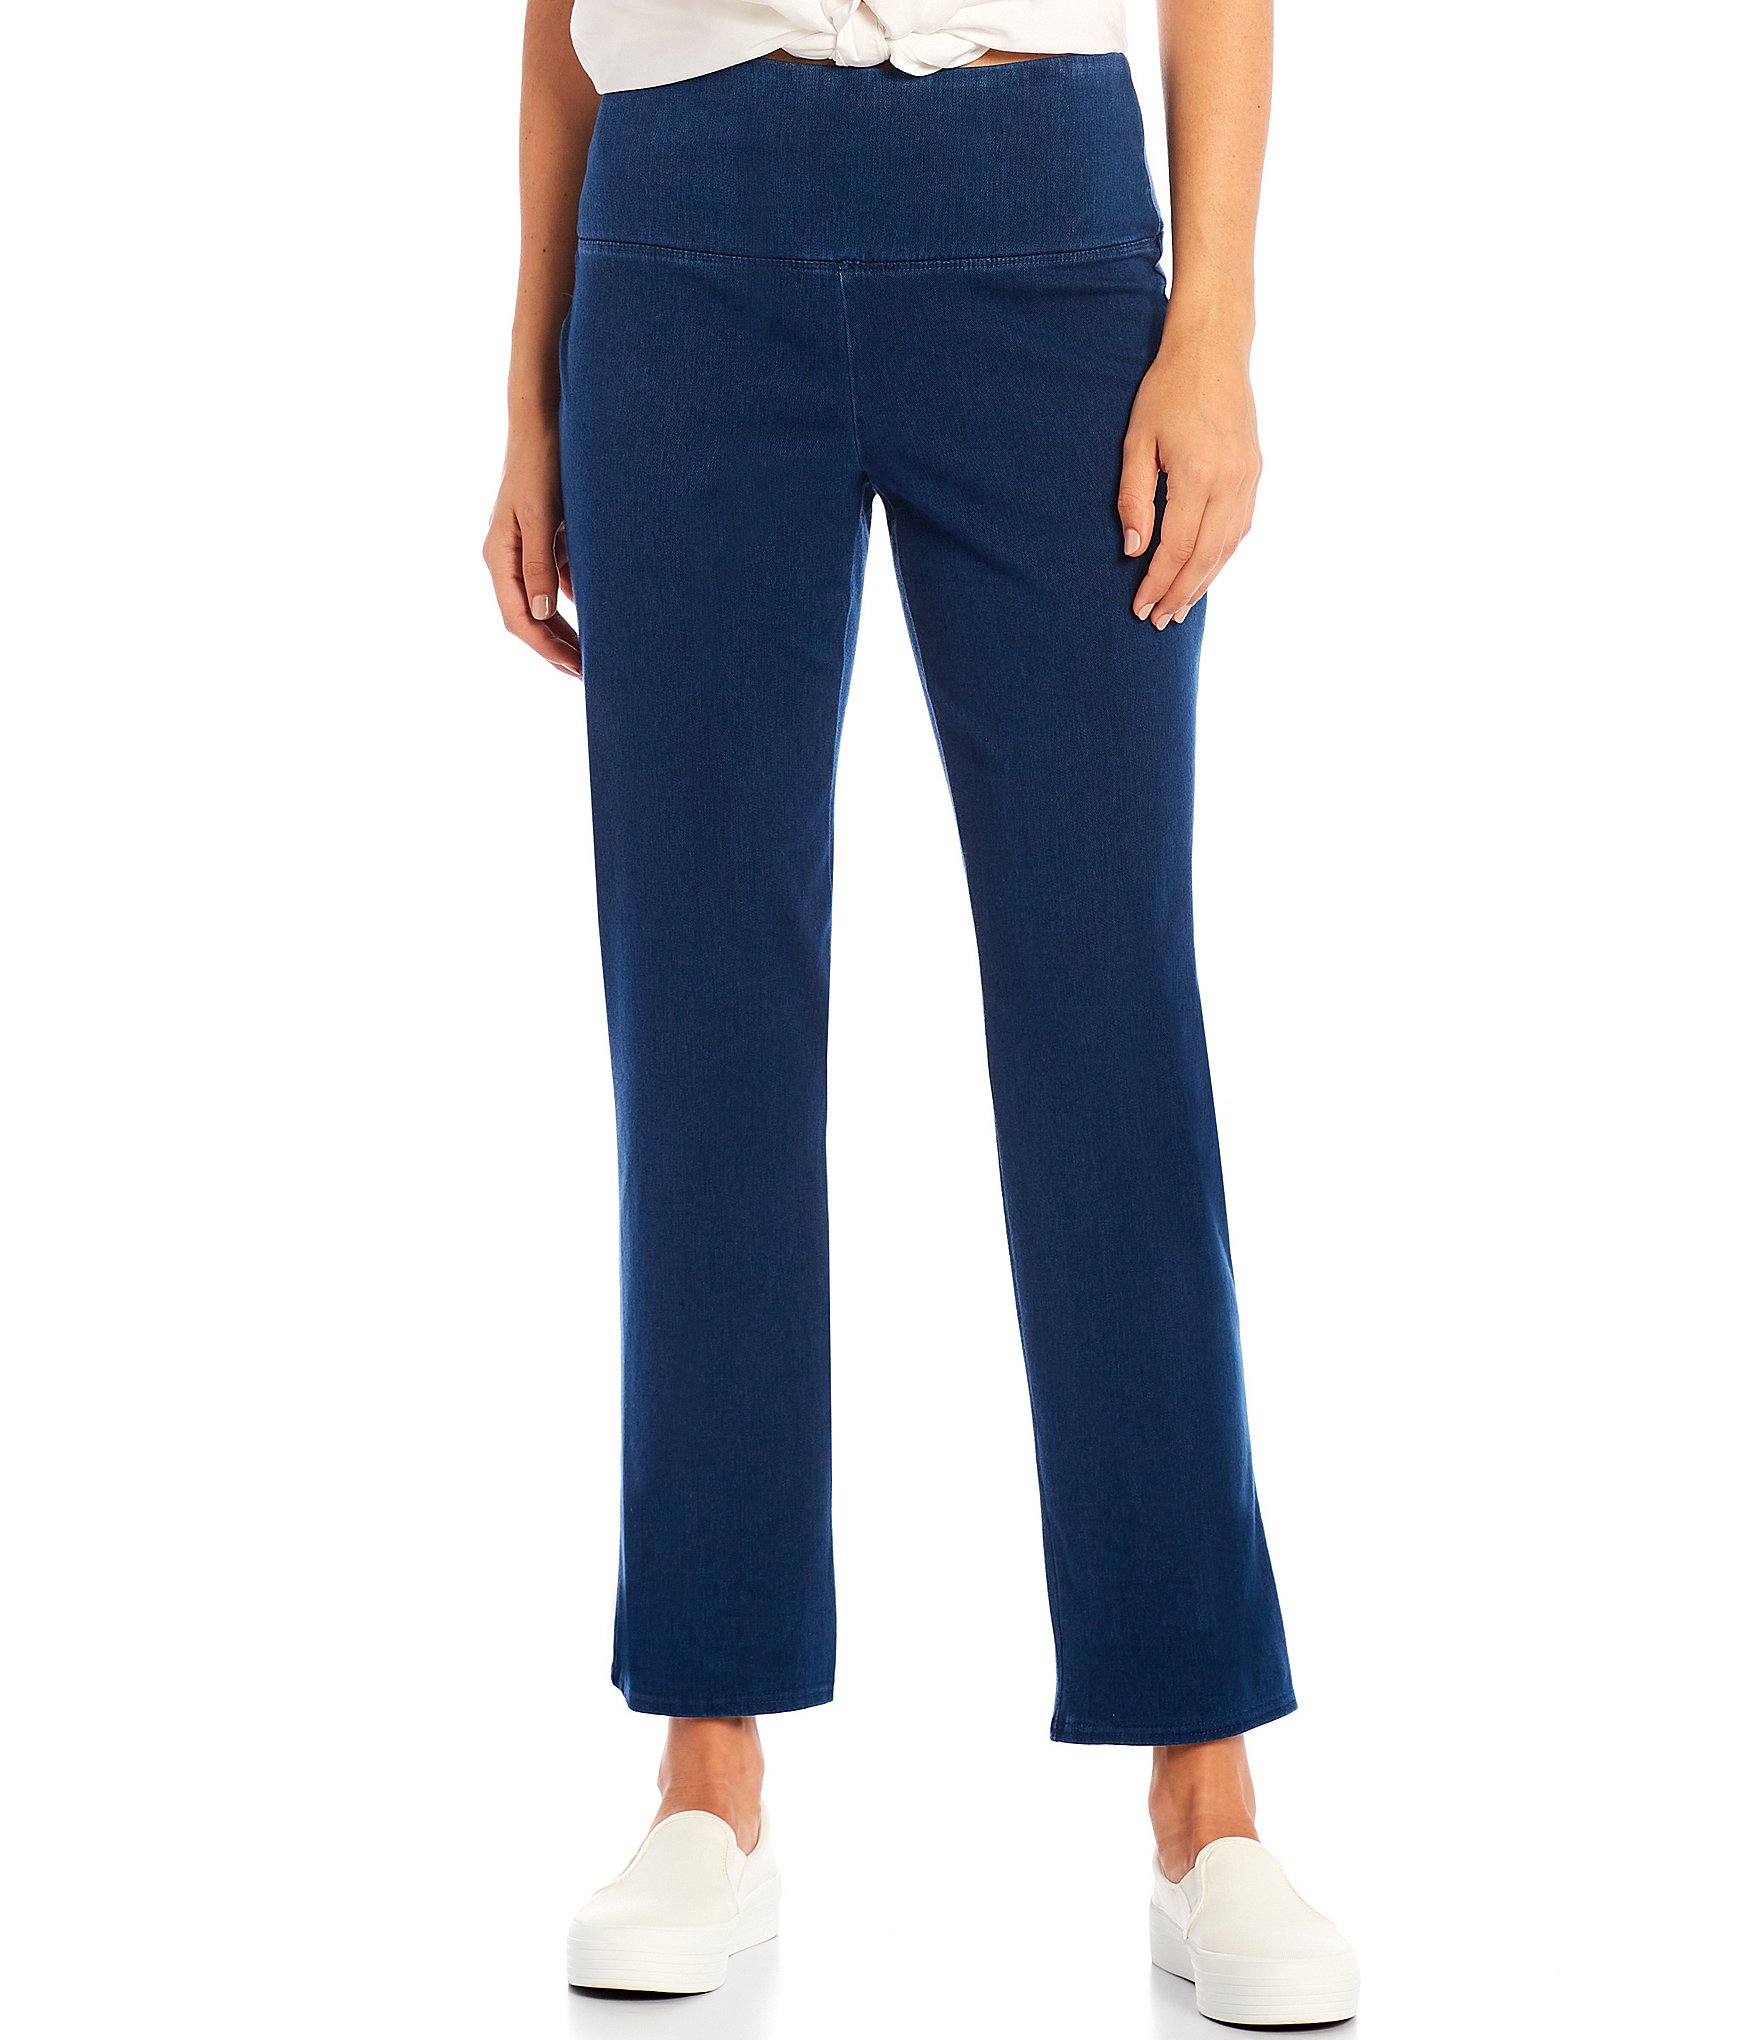 Intro Love The Fit Women's Blue Knit Corduroy Leggings Tummy Control Large  #1441 - $21 - From Tana